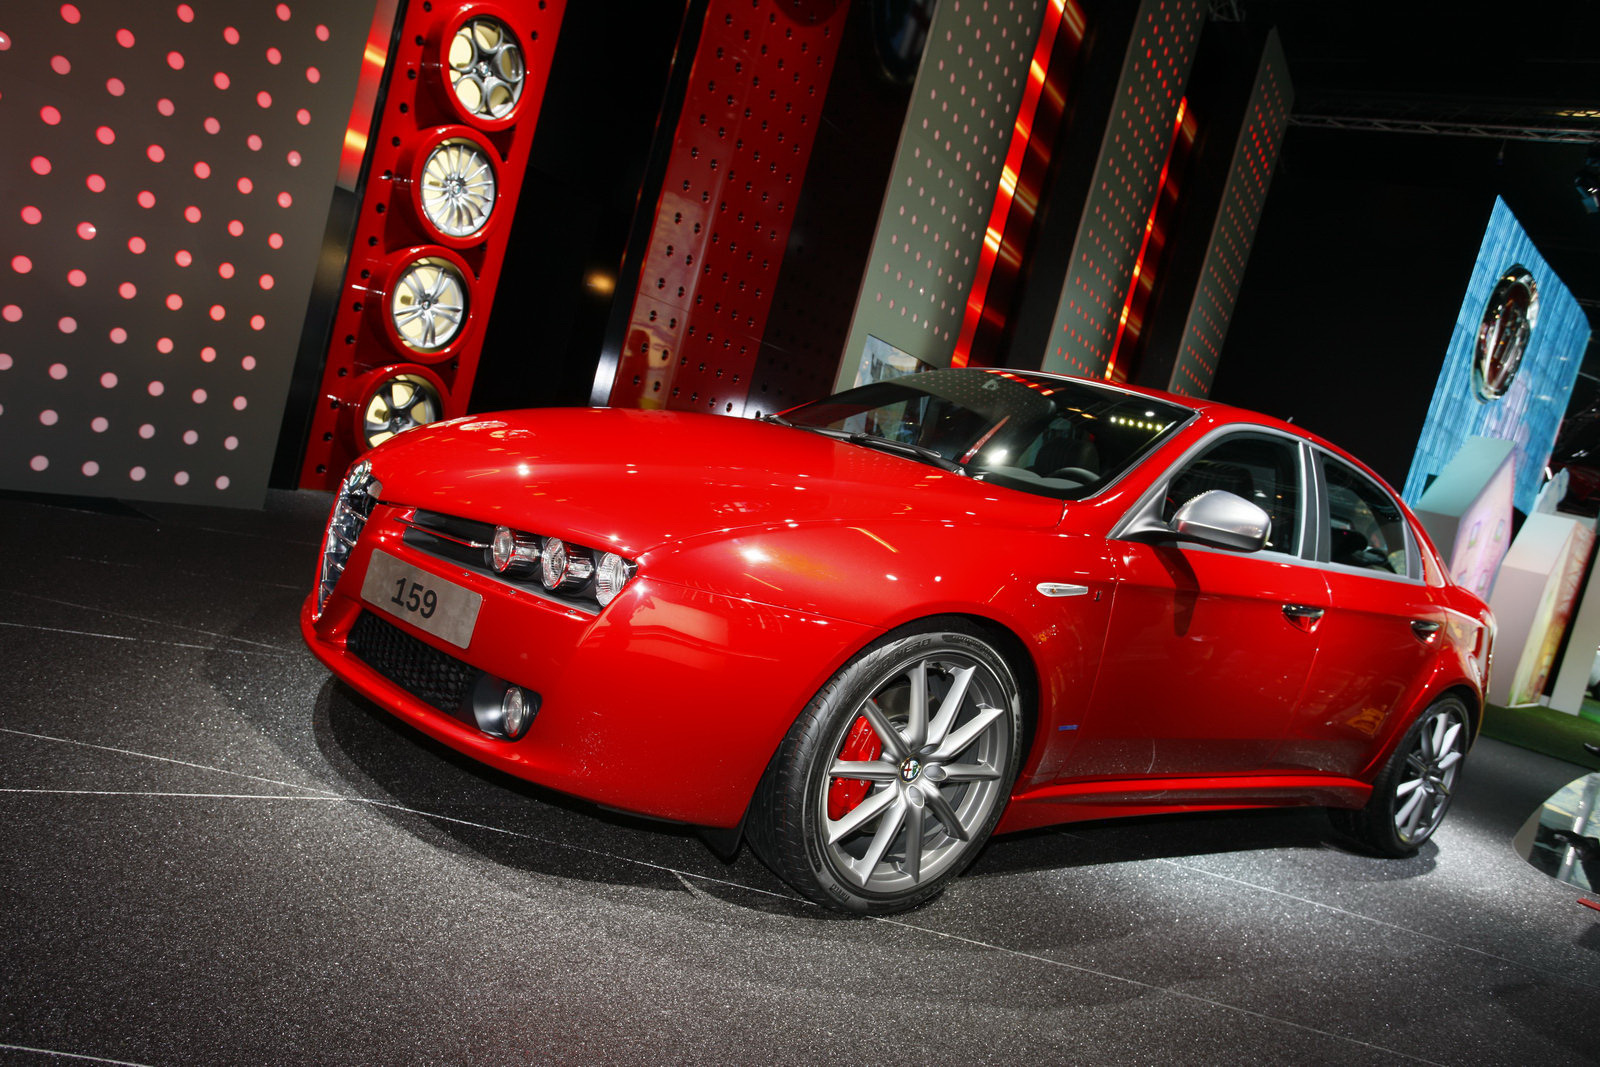 Here's Our Verdict On The Alfa Romeo 159 (And Whether You Should Buy One)